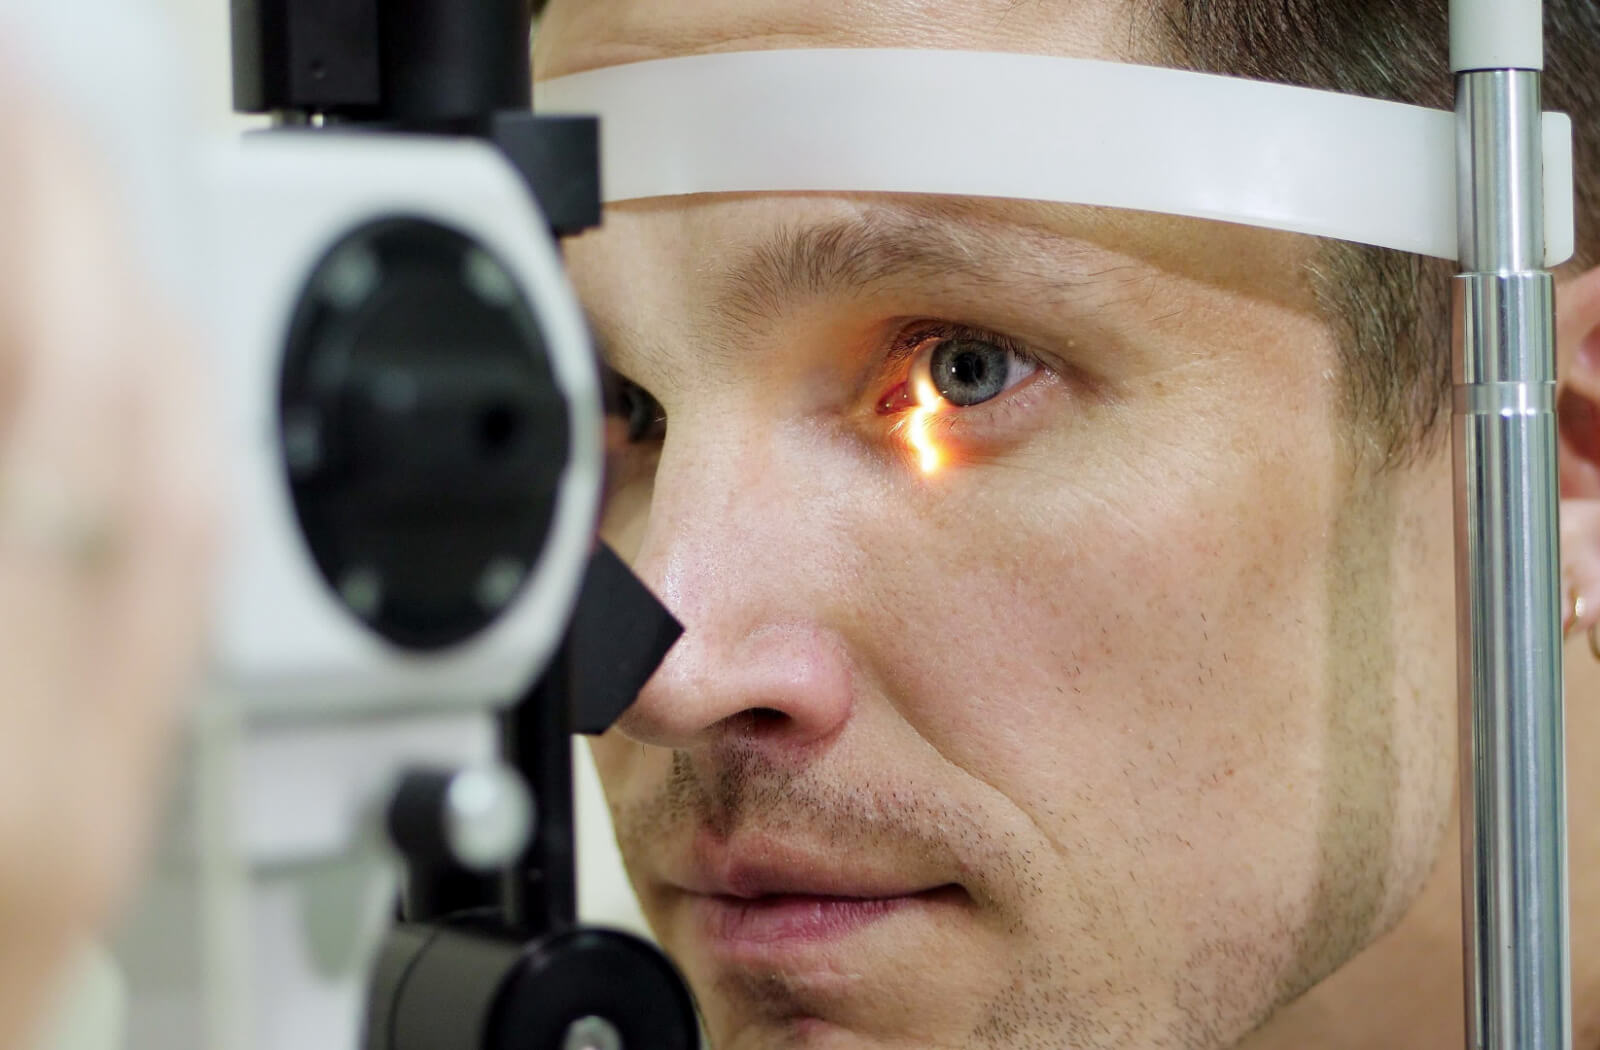 A man undergoing an eye exam with the use of an ophthalmoscope.